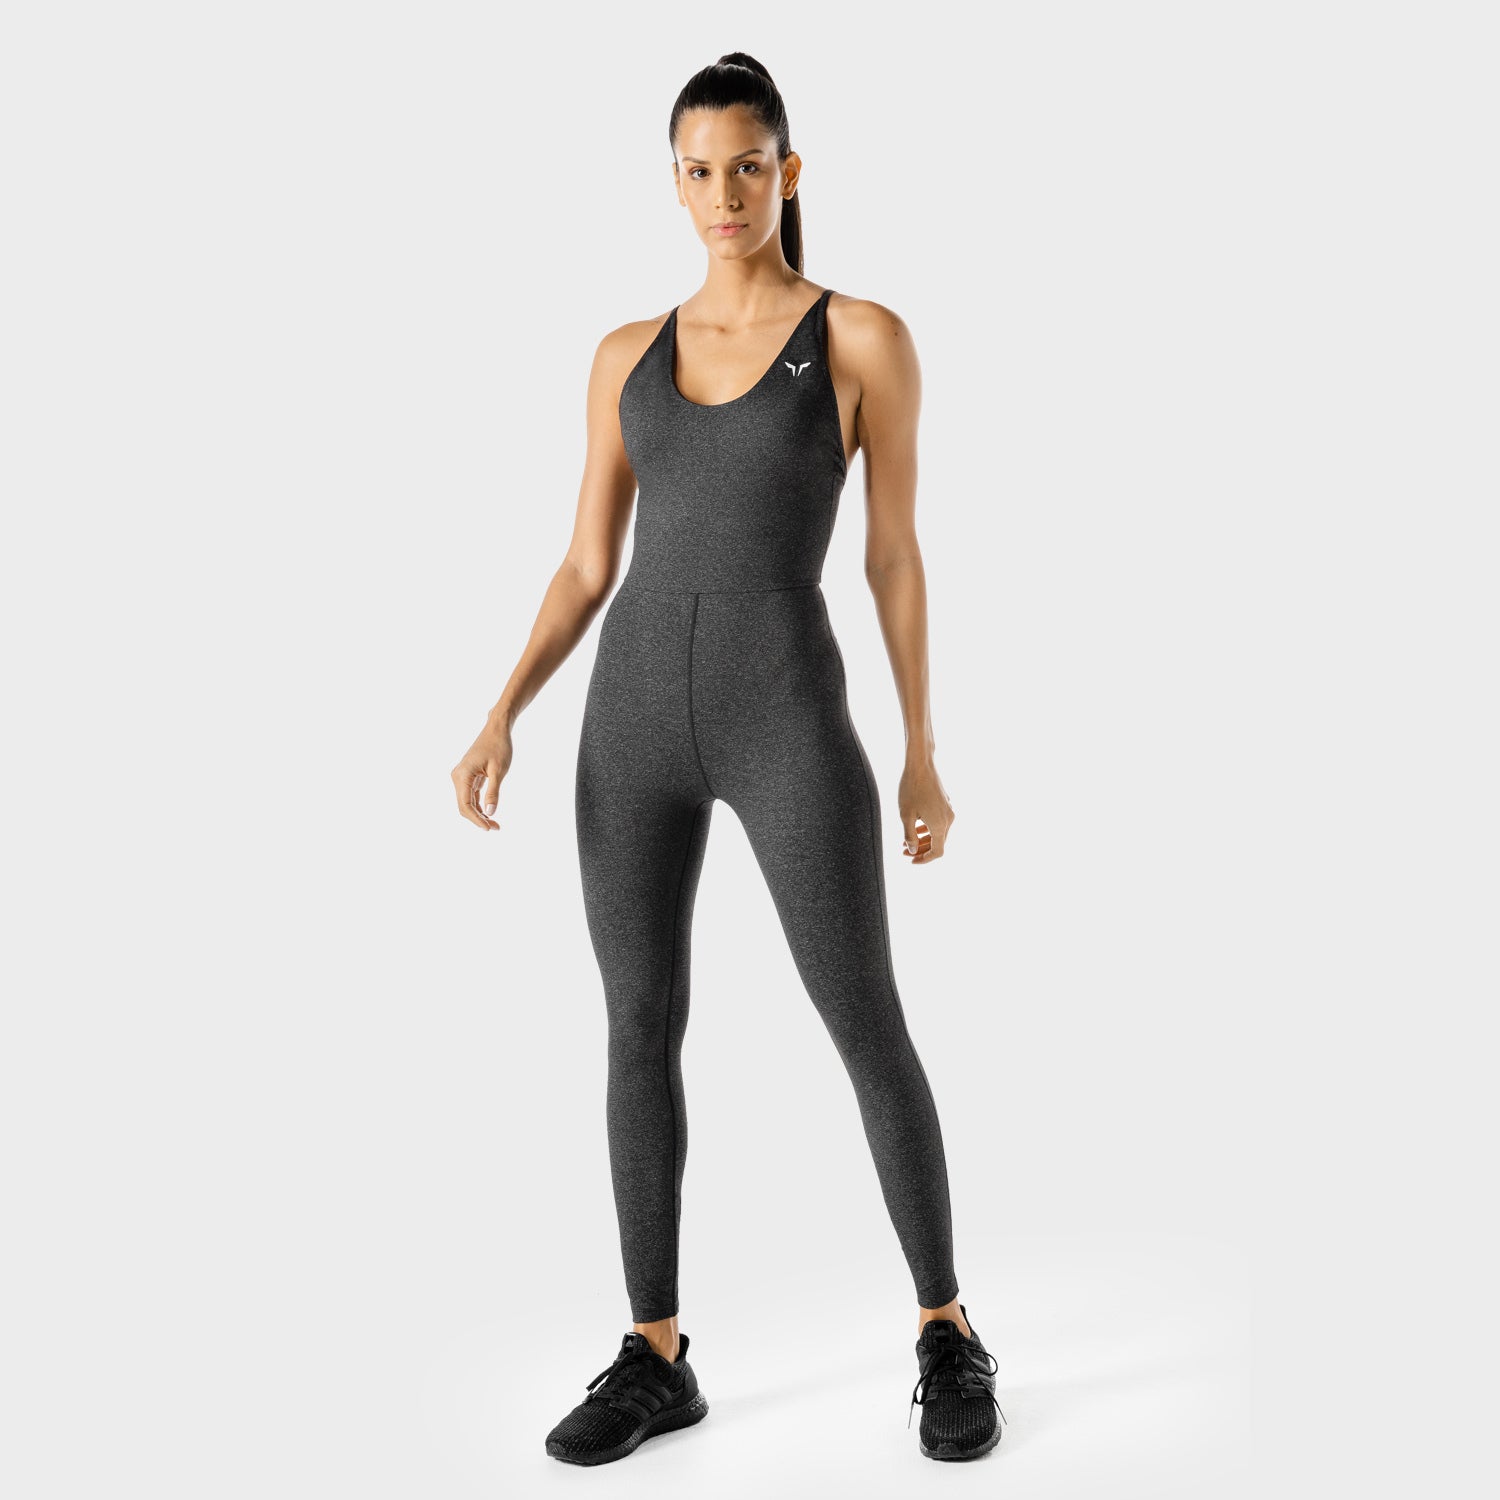 squatwolf-gym-wear-womens-fitness-performance-catsuit-black-workout-tops